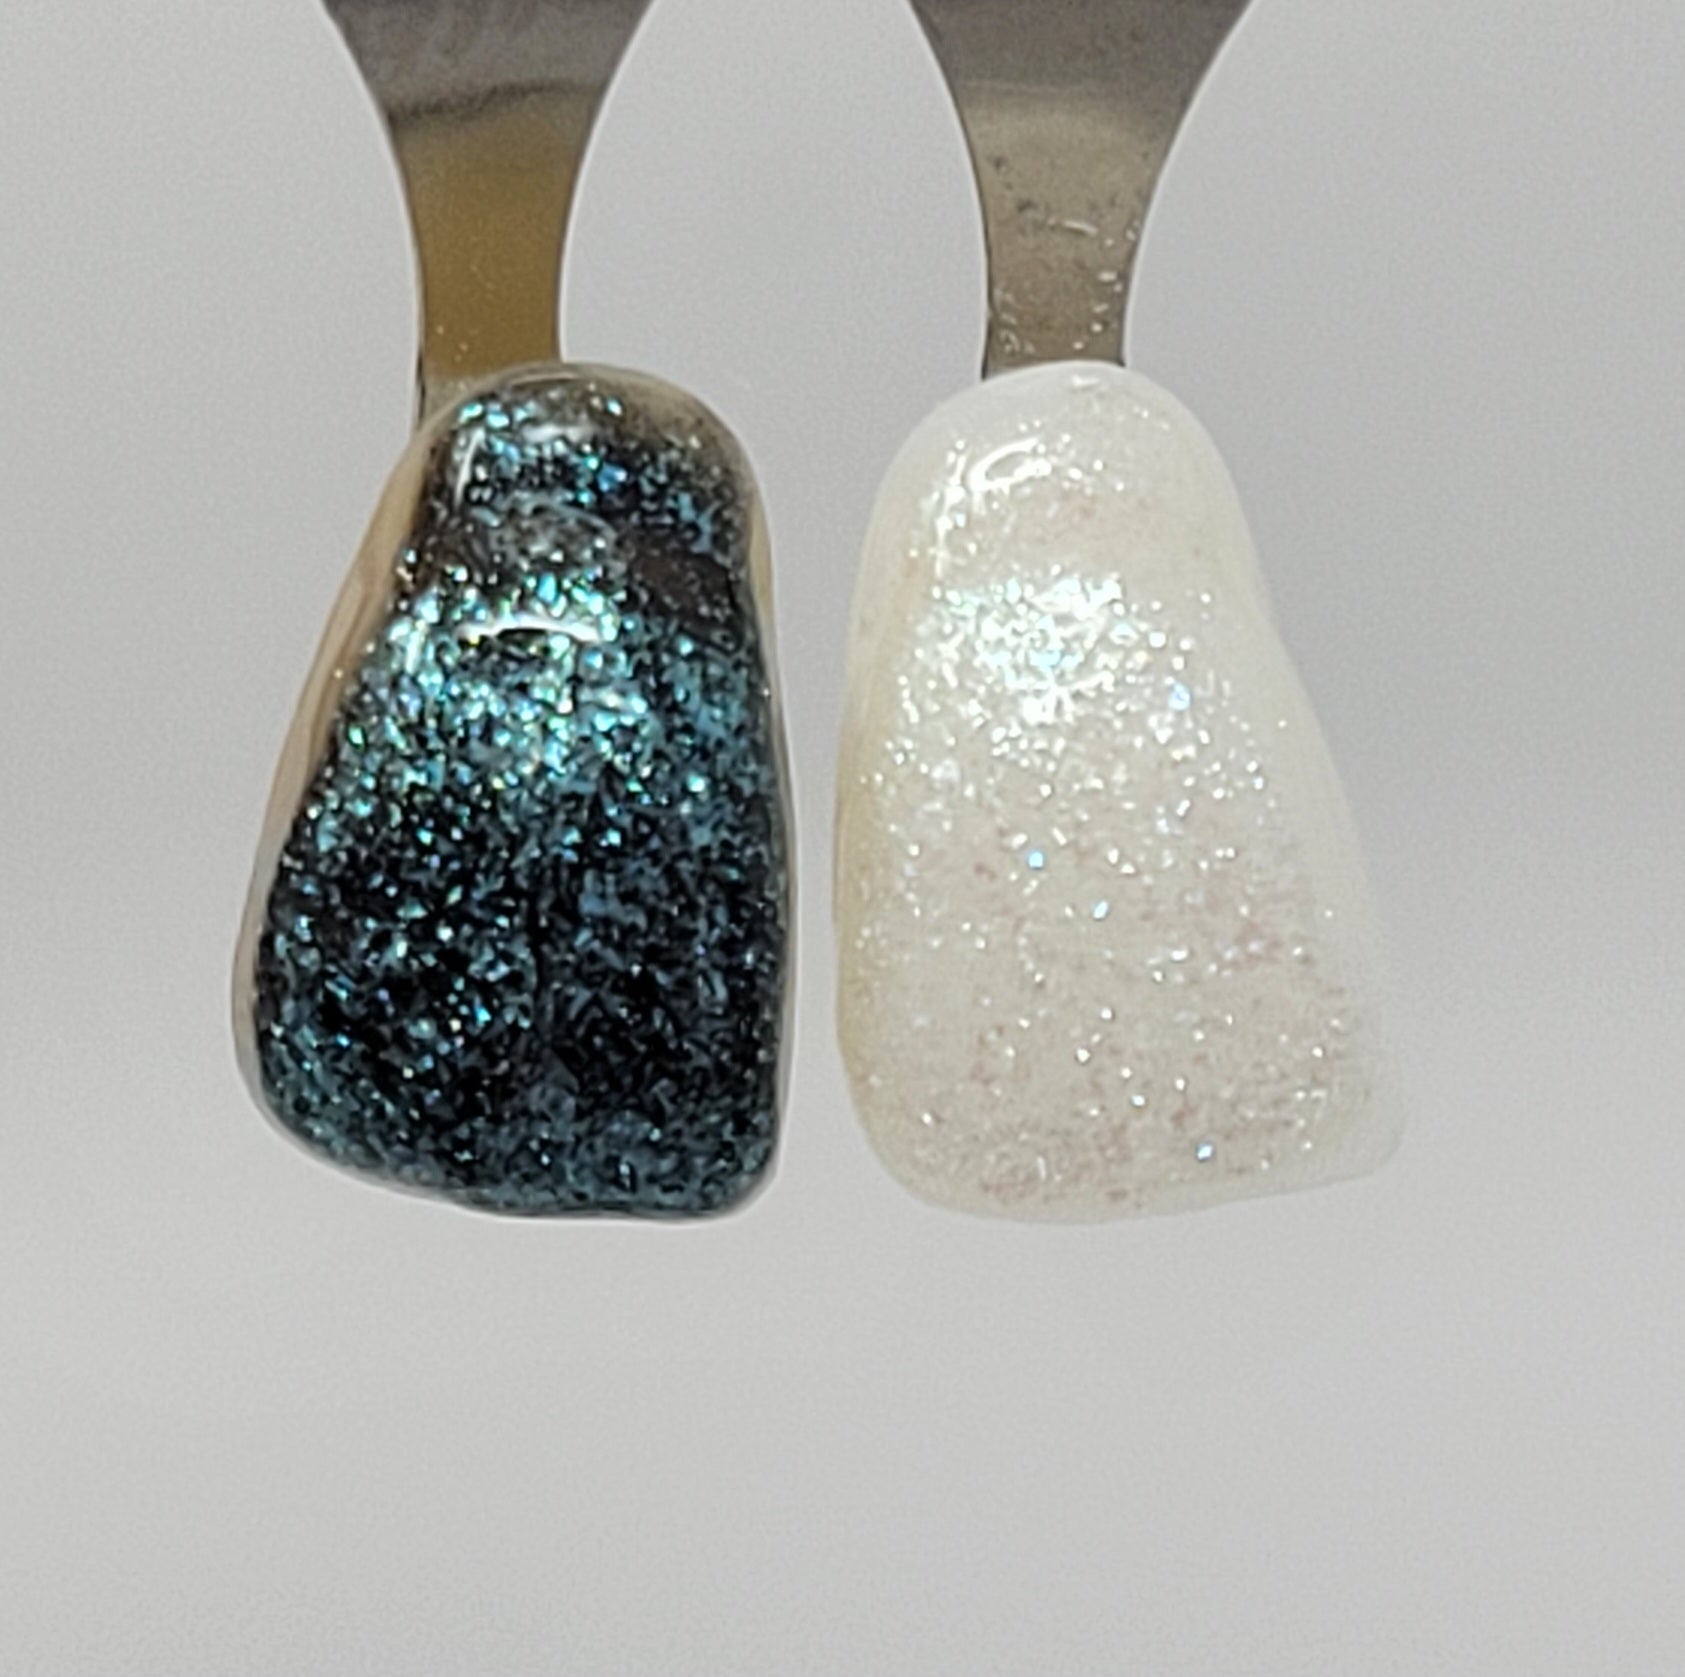 Green Opal Temporary Tattooth Colorant on a demo tooth.  These colorants can be applied to teeth to temporarily alter their color or iridescence.